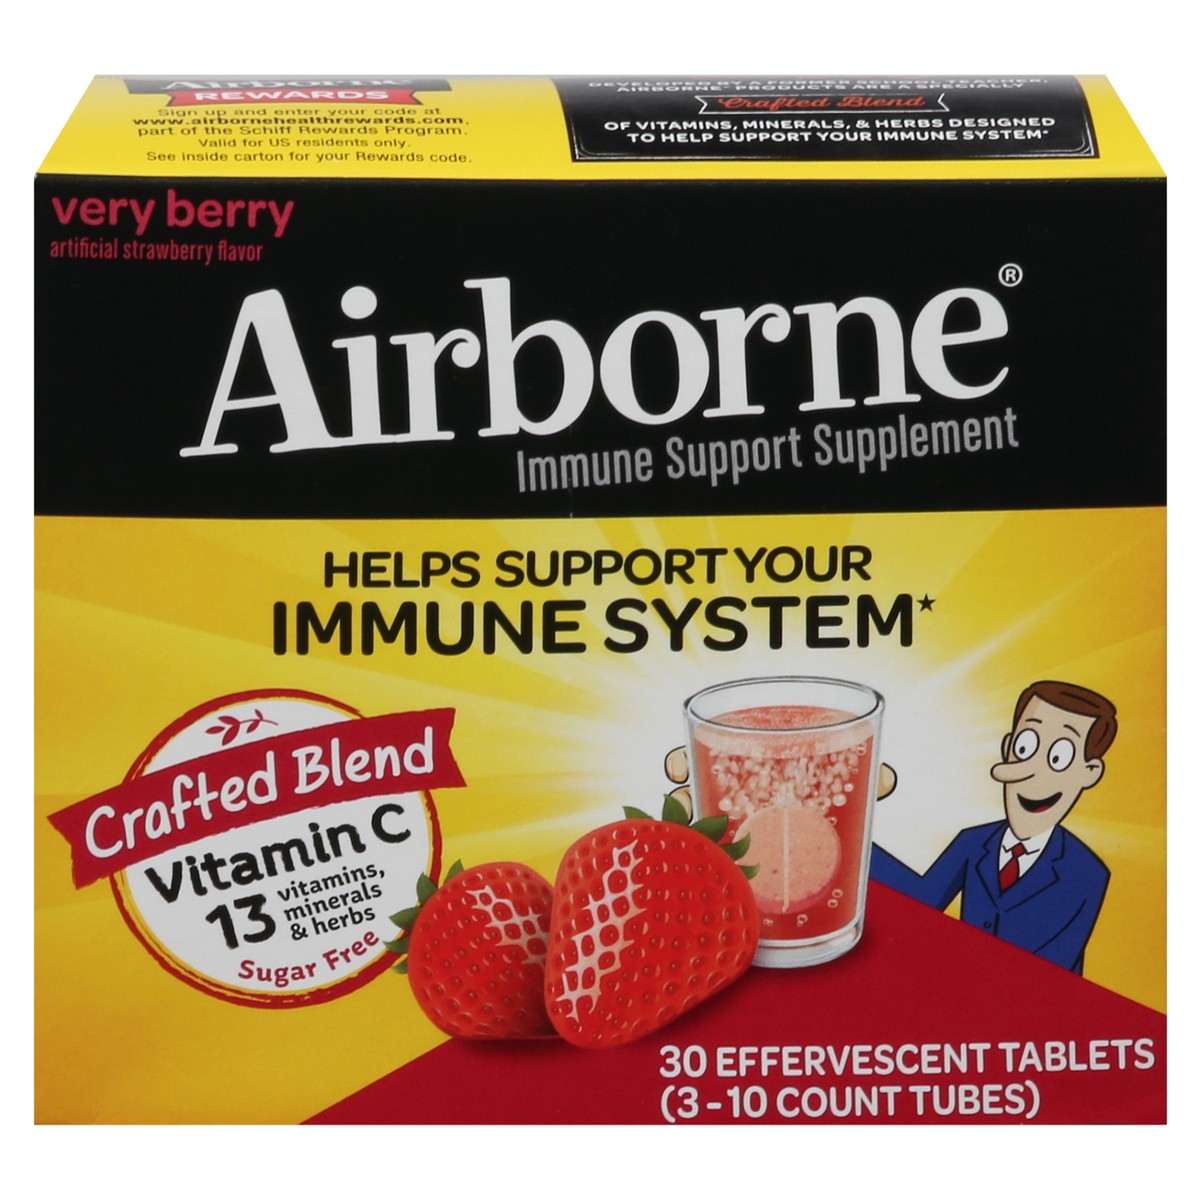 slide 14 of 14, Airborne Very Berry Effervescent Tablets, 30 count - 1000mg of Vitamin C, Immune Support Supplement, 30 ct